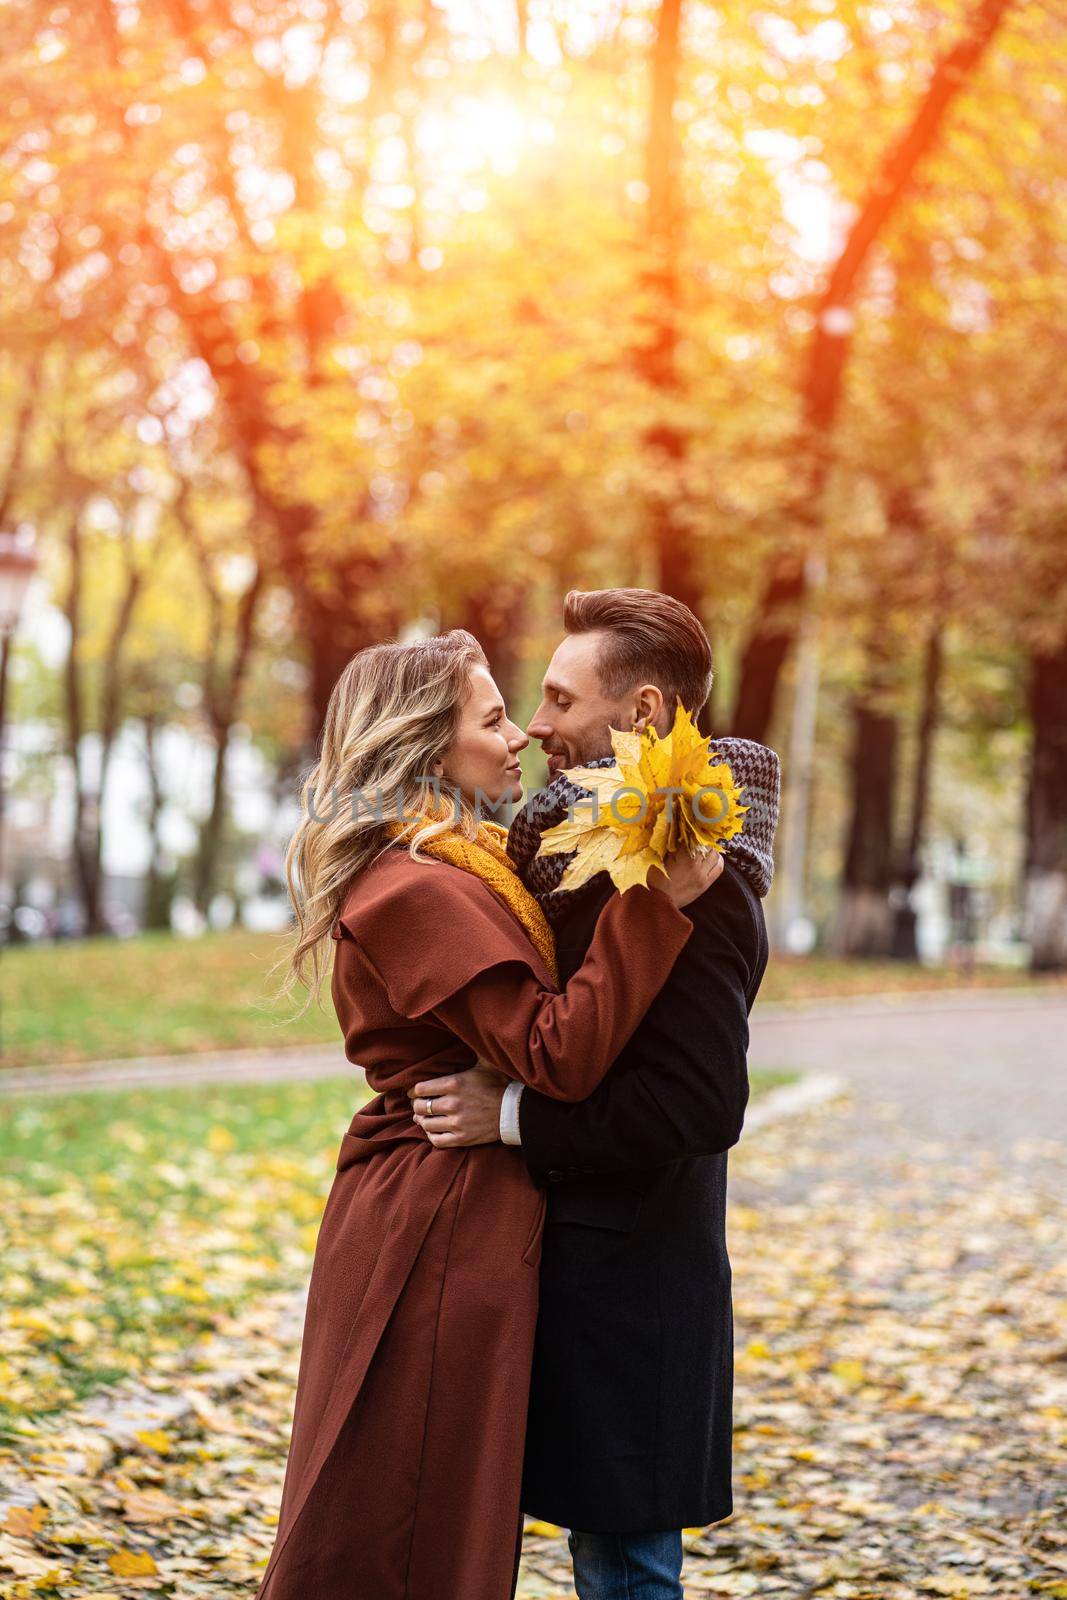 Husband and a wife hugged smile looking at each other in the autumn park. Half-length portrait of a kissing young couple. Outdoor shot of a young couple in love in a autumn park.